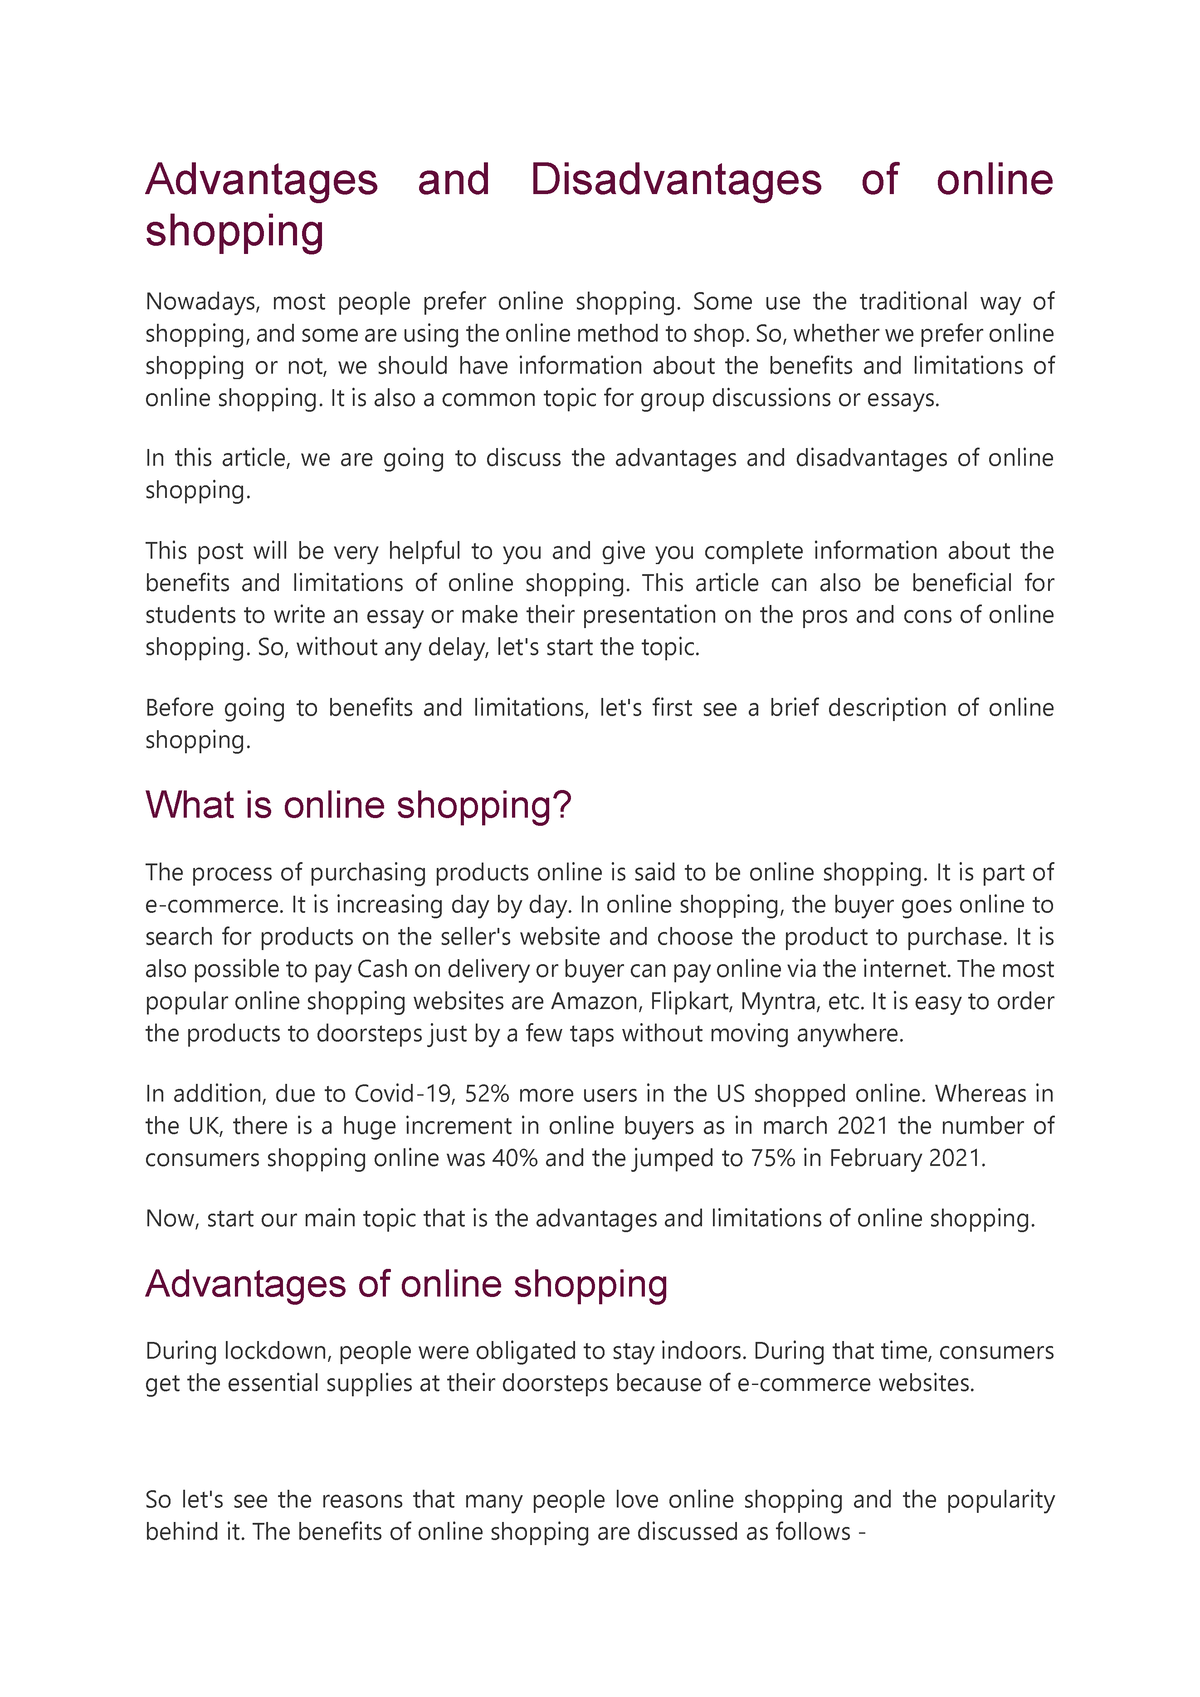 the advantages of online shopping essay 120 words